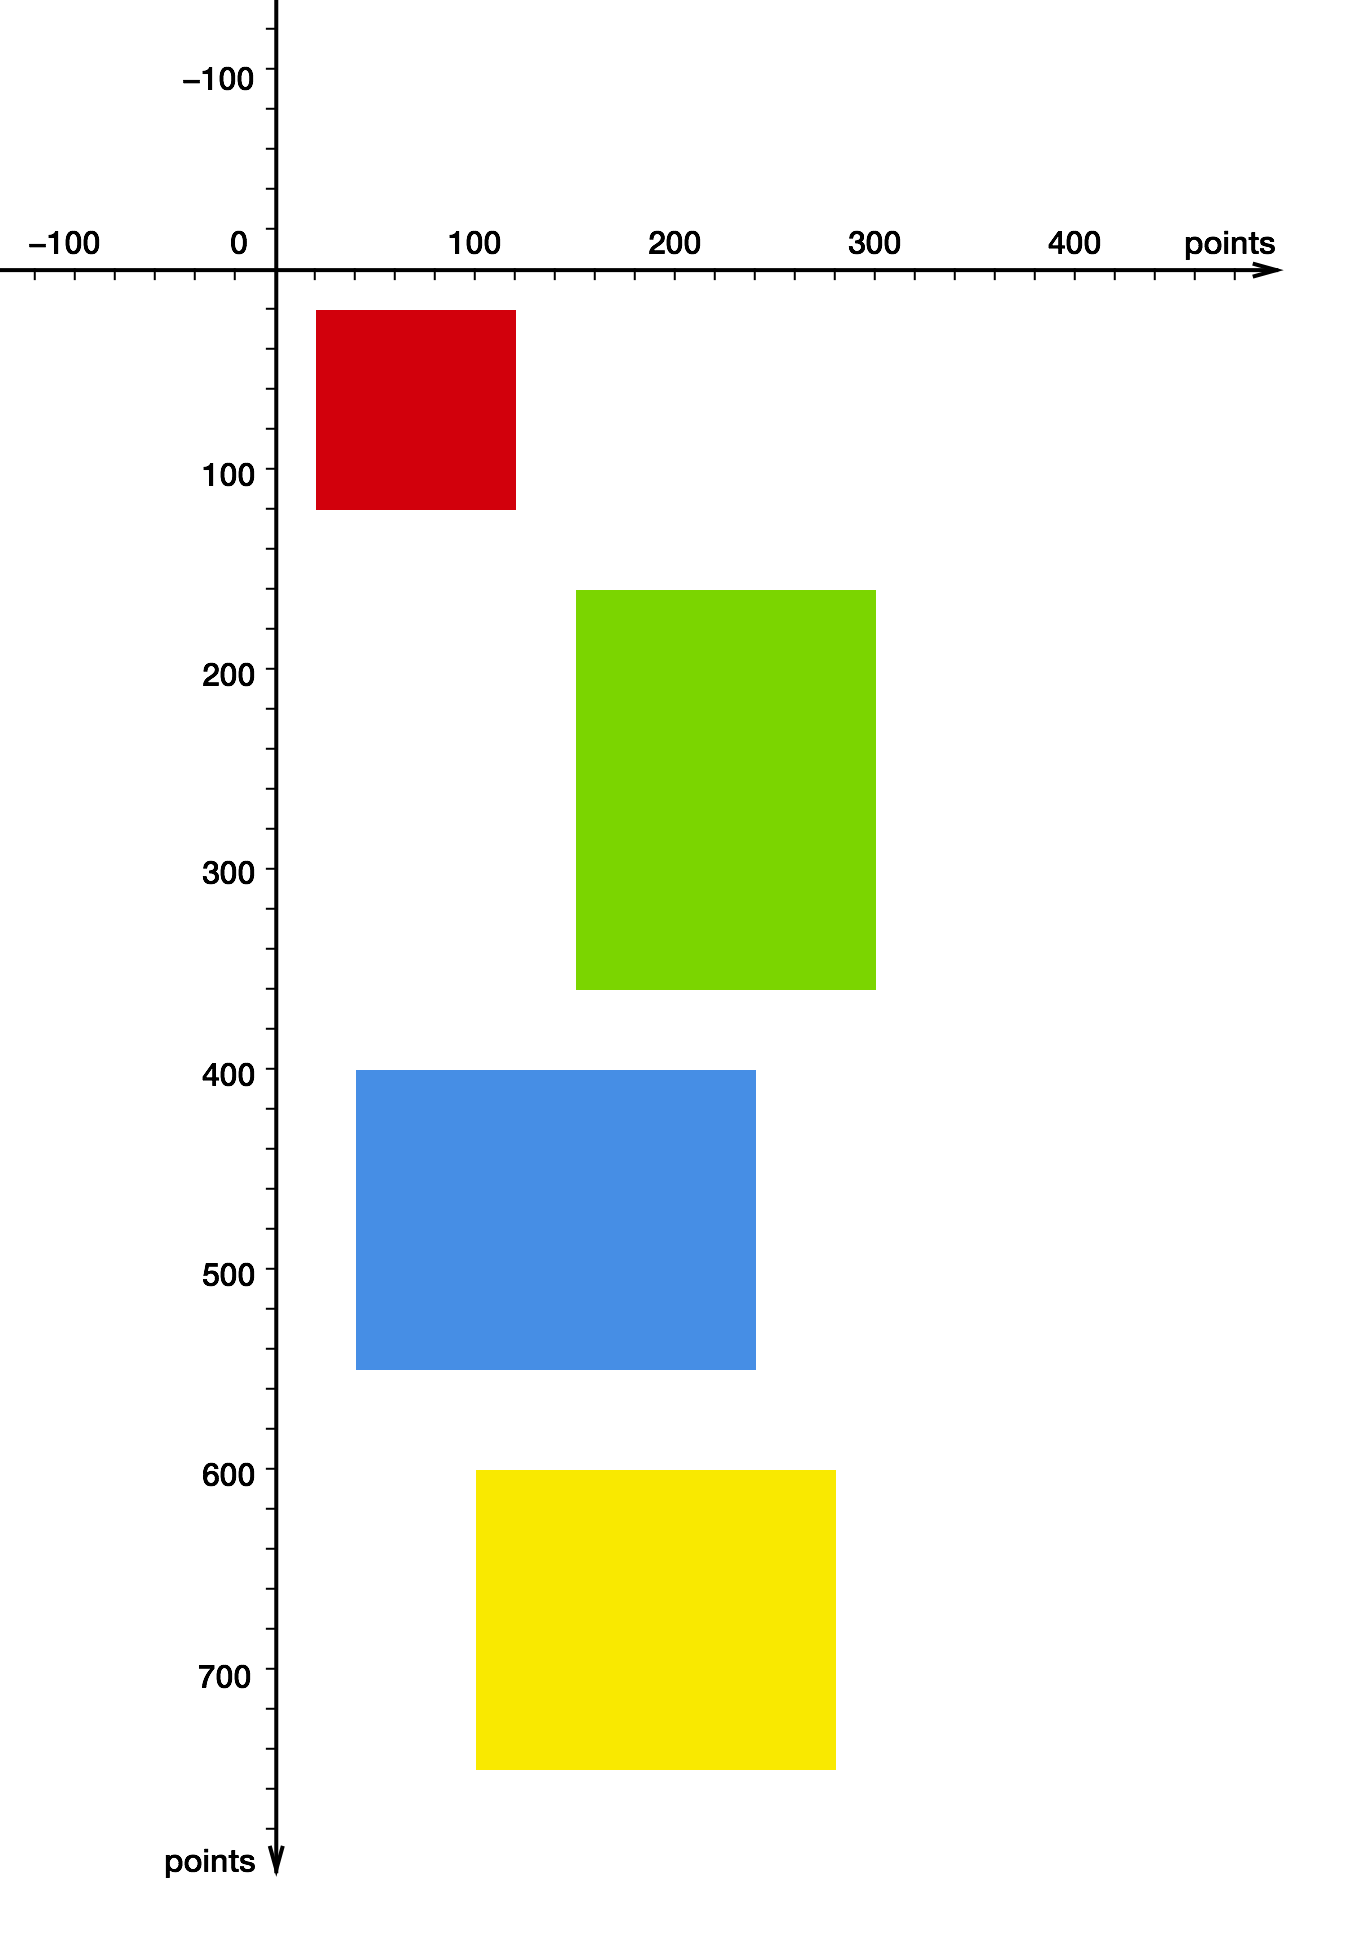 Four rectangles with different colors and sizes placed at different coordinates in the coordinate system